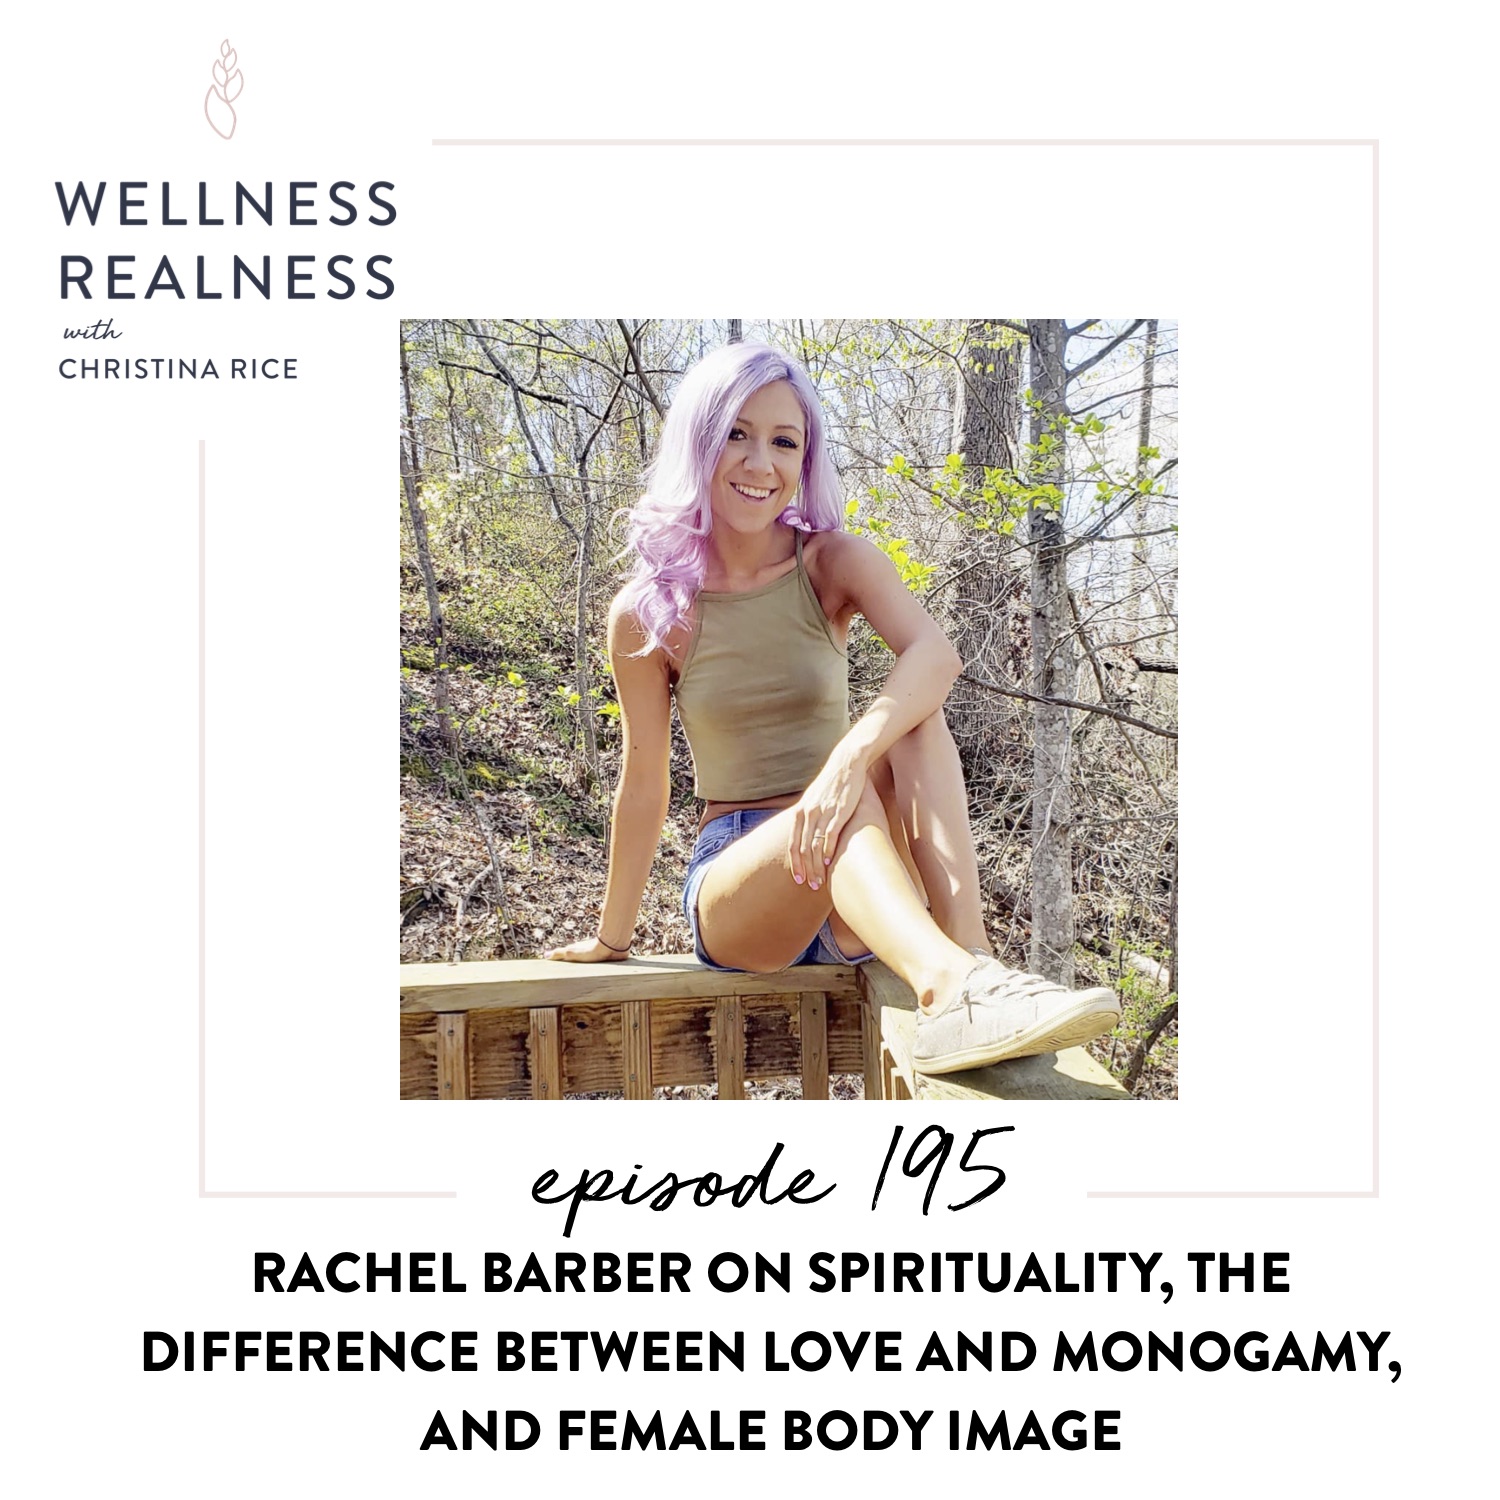 195: Rachel Barber on Spirituality, the Difference Between Love and Monogamy, and Female Body Image